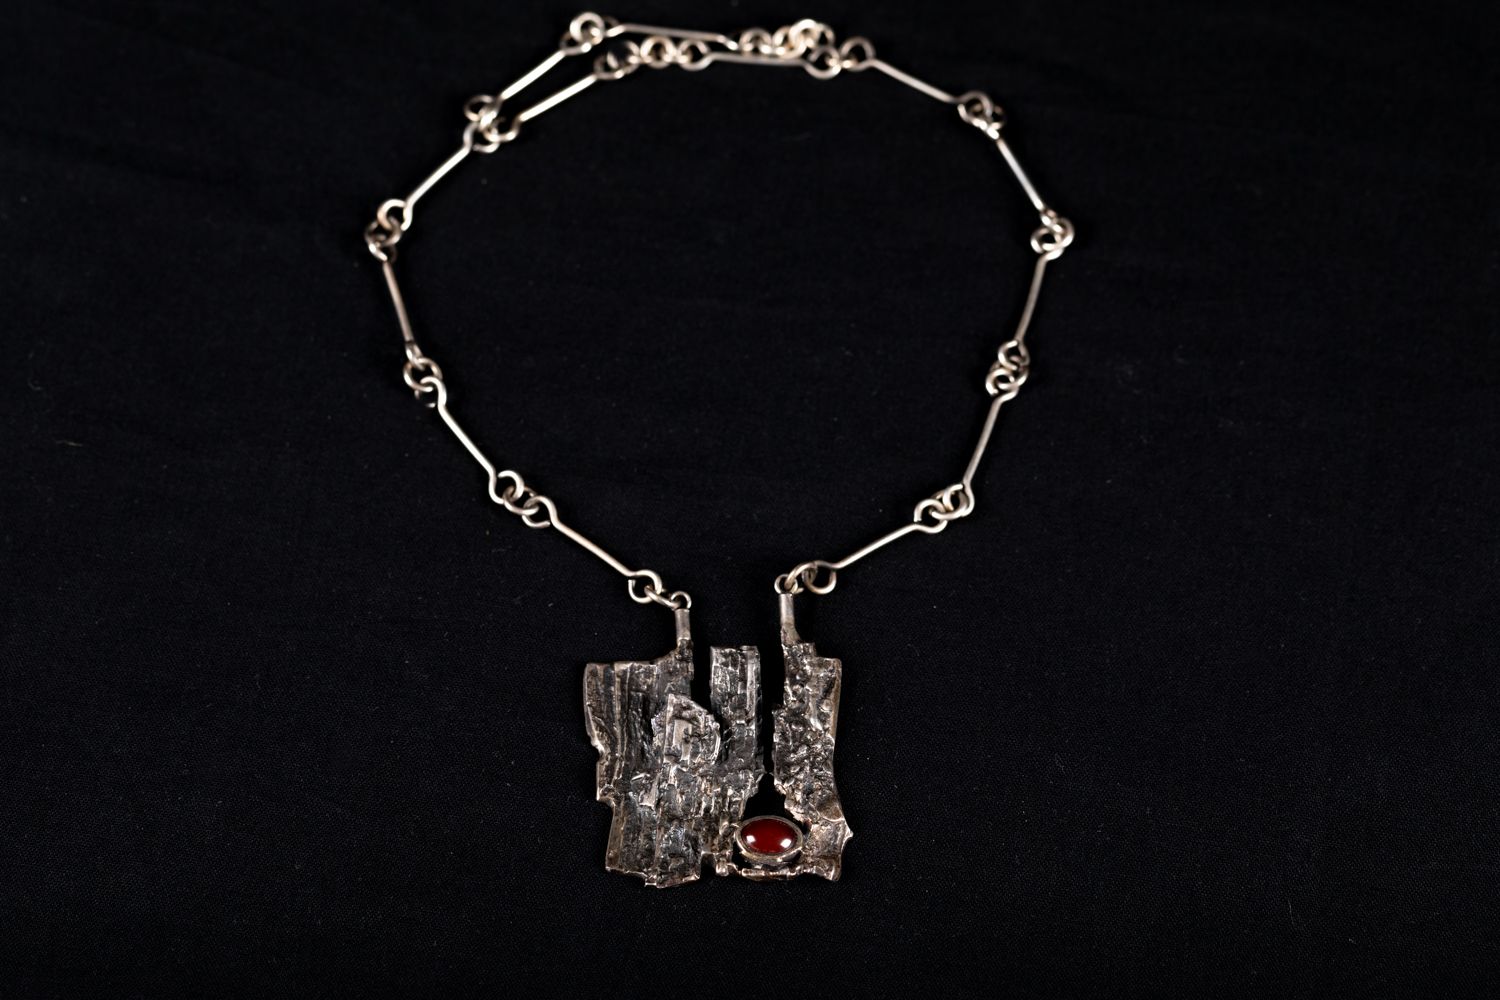 Null Silver necklace 925/100, signed HS?, around 1970; 64g. Length closed 31cm